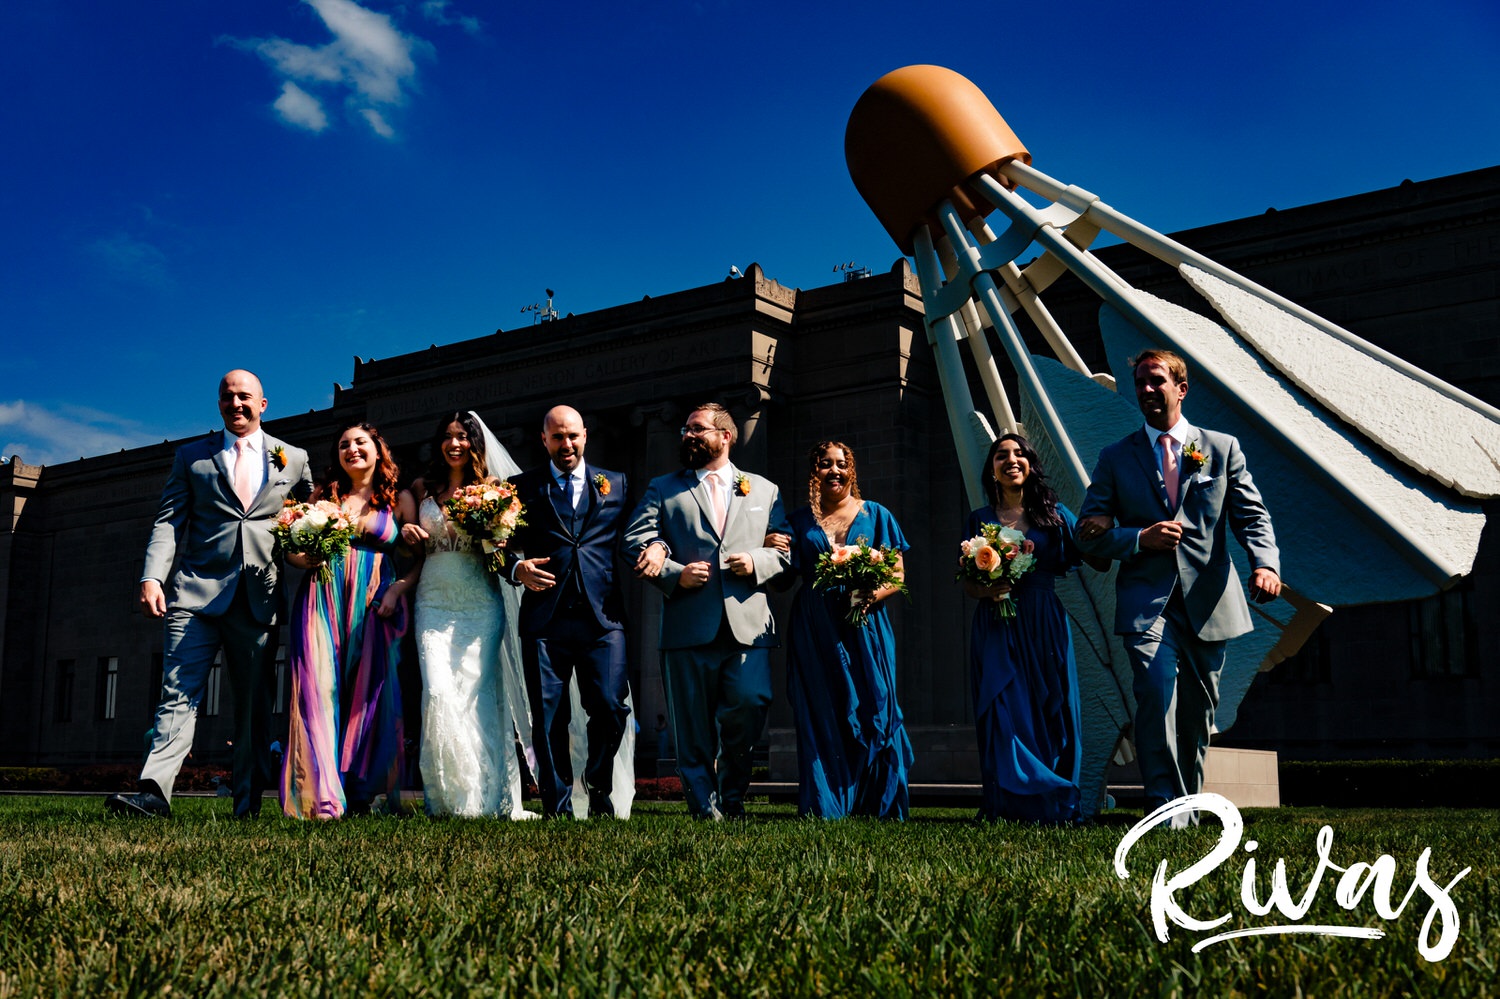 A bright, candid picture of a wedding party walking arm in arm across the green lawn of The Nelson Atkins Museum of Art with a Shuttlecock visible in the background. 